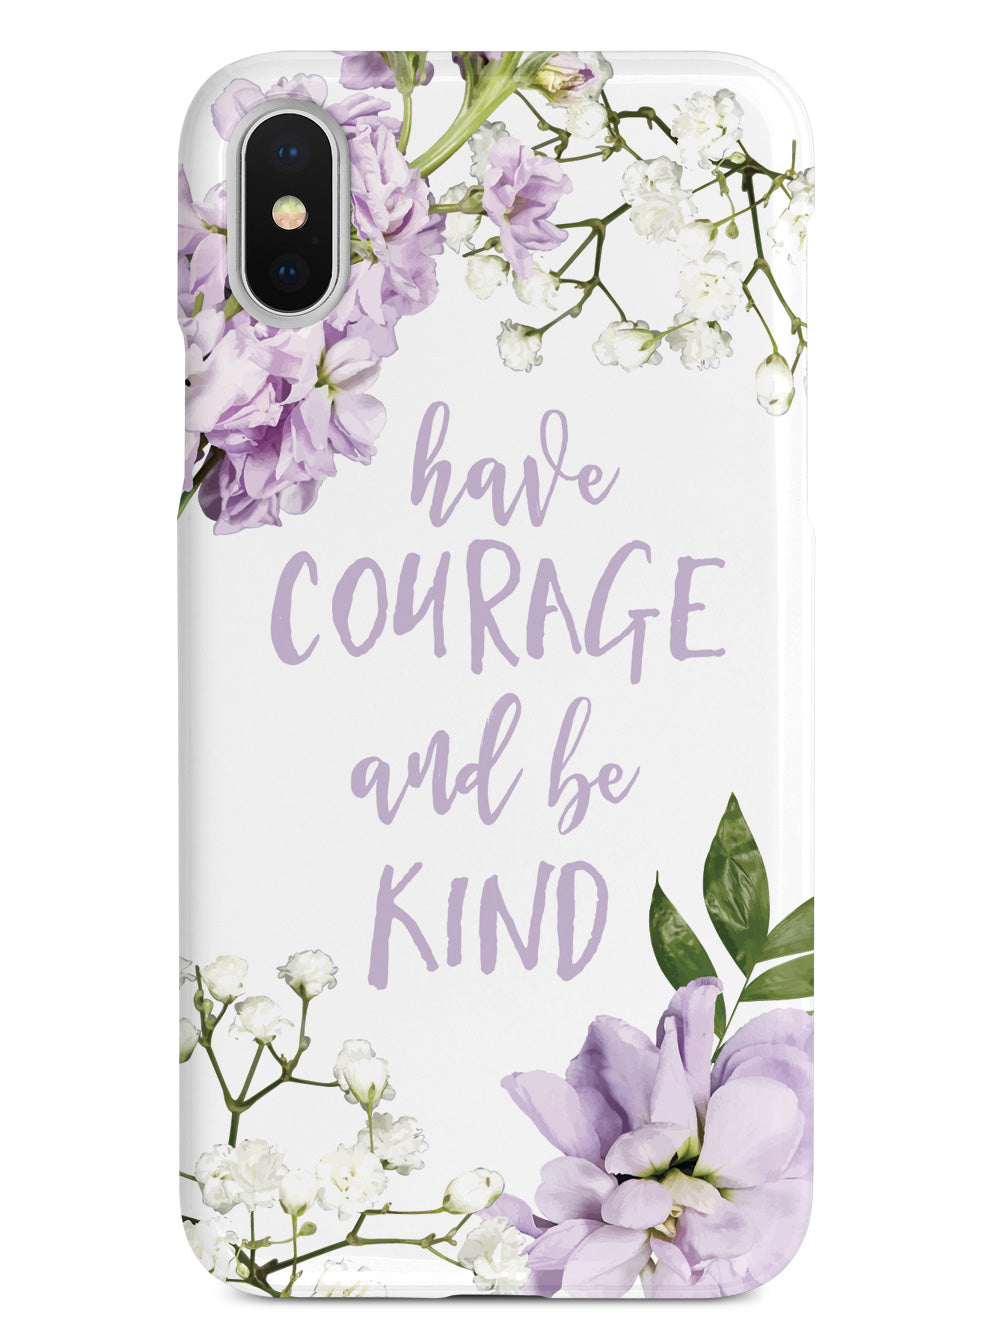 Have Courage and Be Kind Case